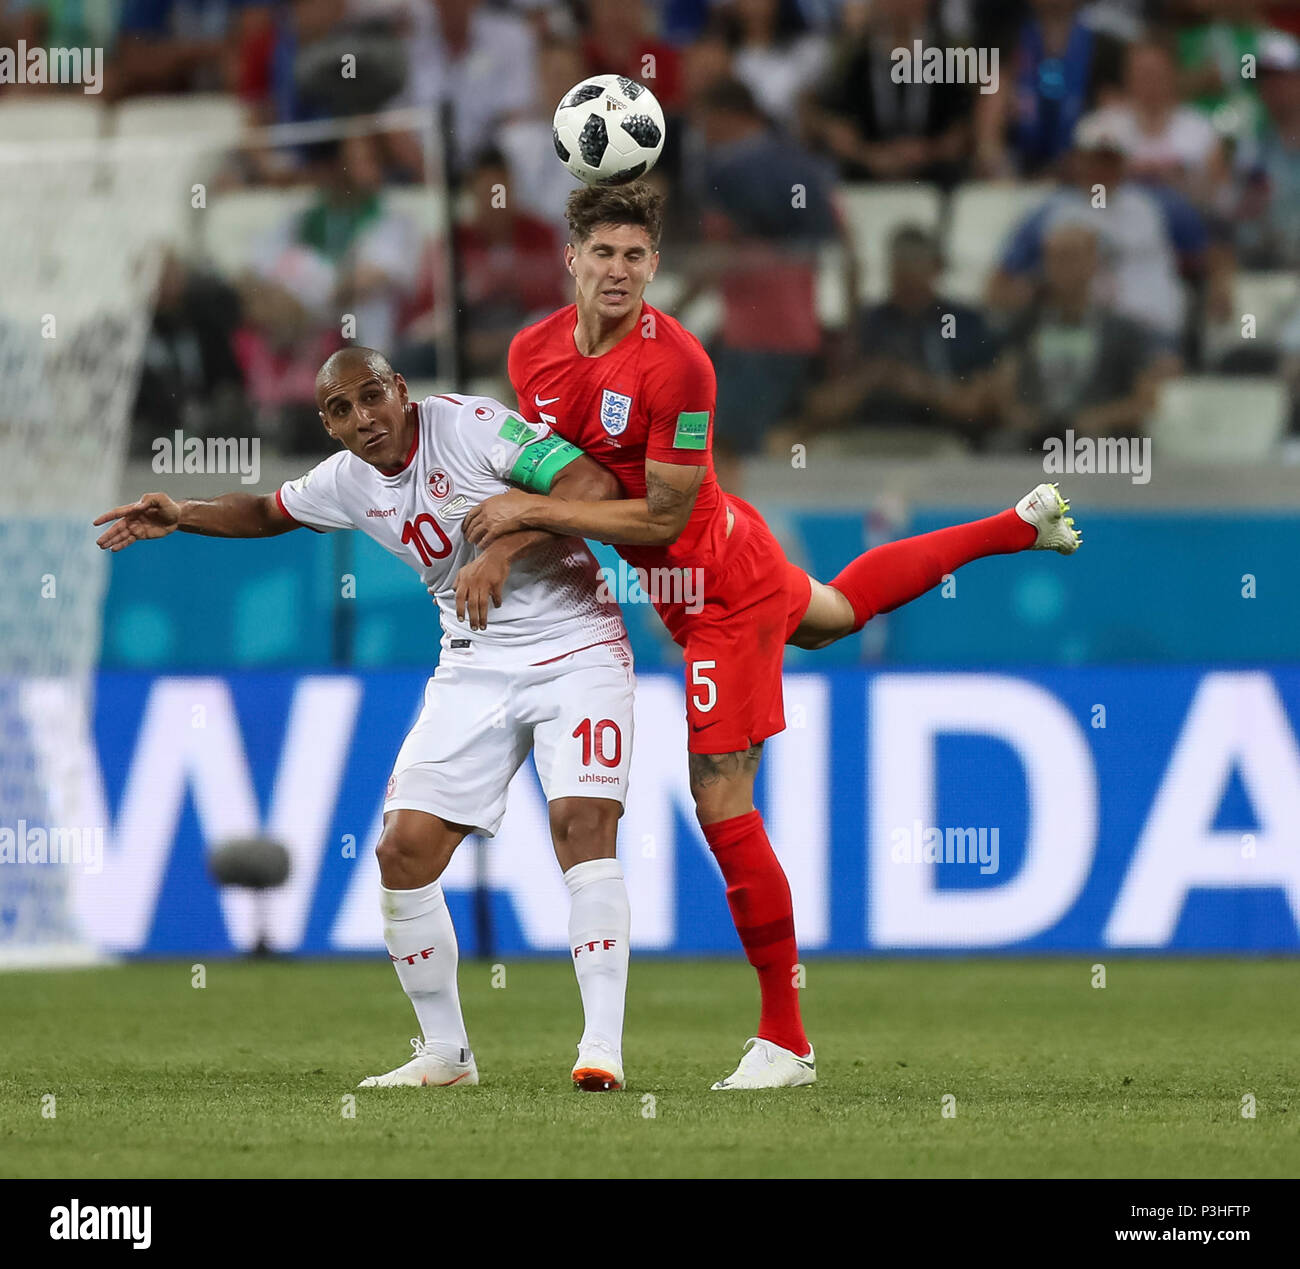 Volgograd, Russia. 18th June, 2018. Wahbi Khazri of Tunisia and John Stones of England during the 2018 FIFA World Cup Group G match between Tunisia and England at Volgograd Arena on June 18th 2018 in Volgograd, Russia.Credit: PHC Images/Alamy Live News Stock Photo